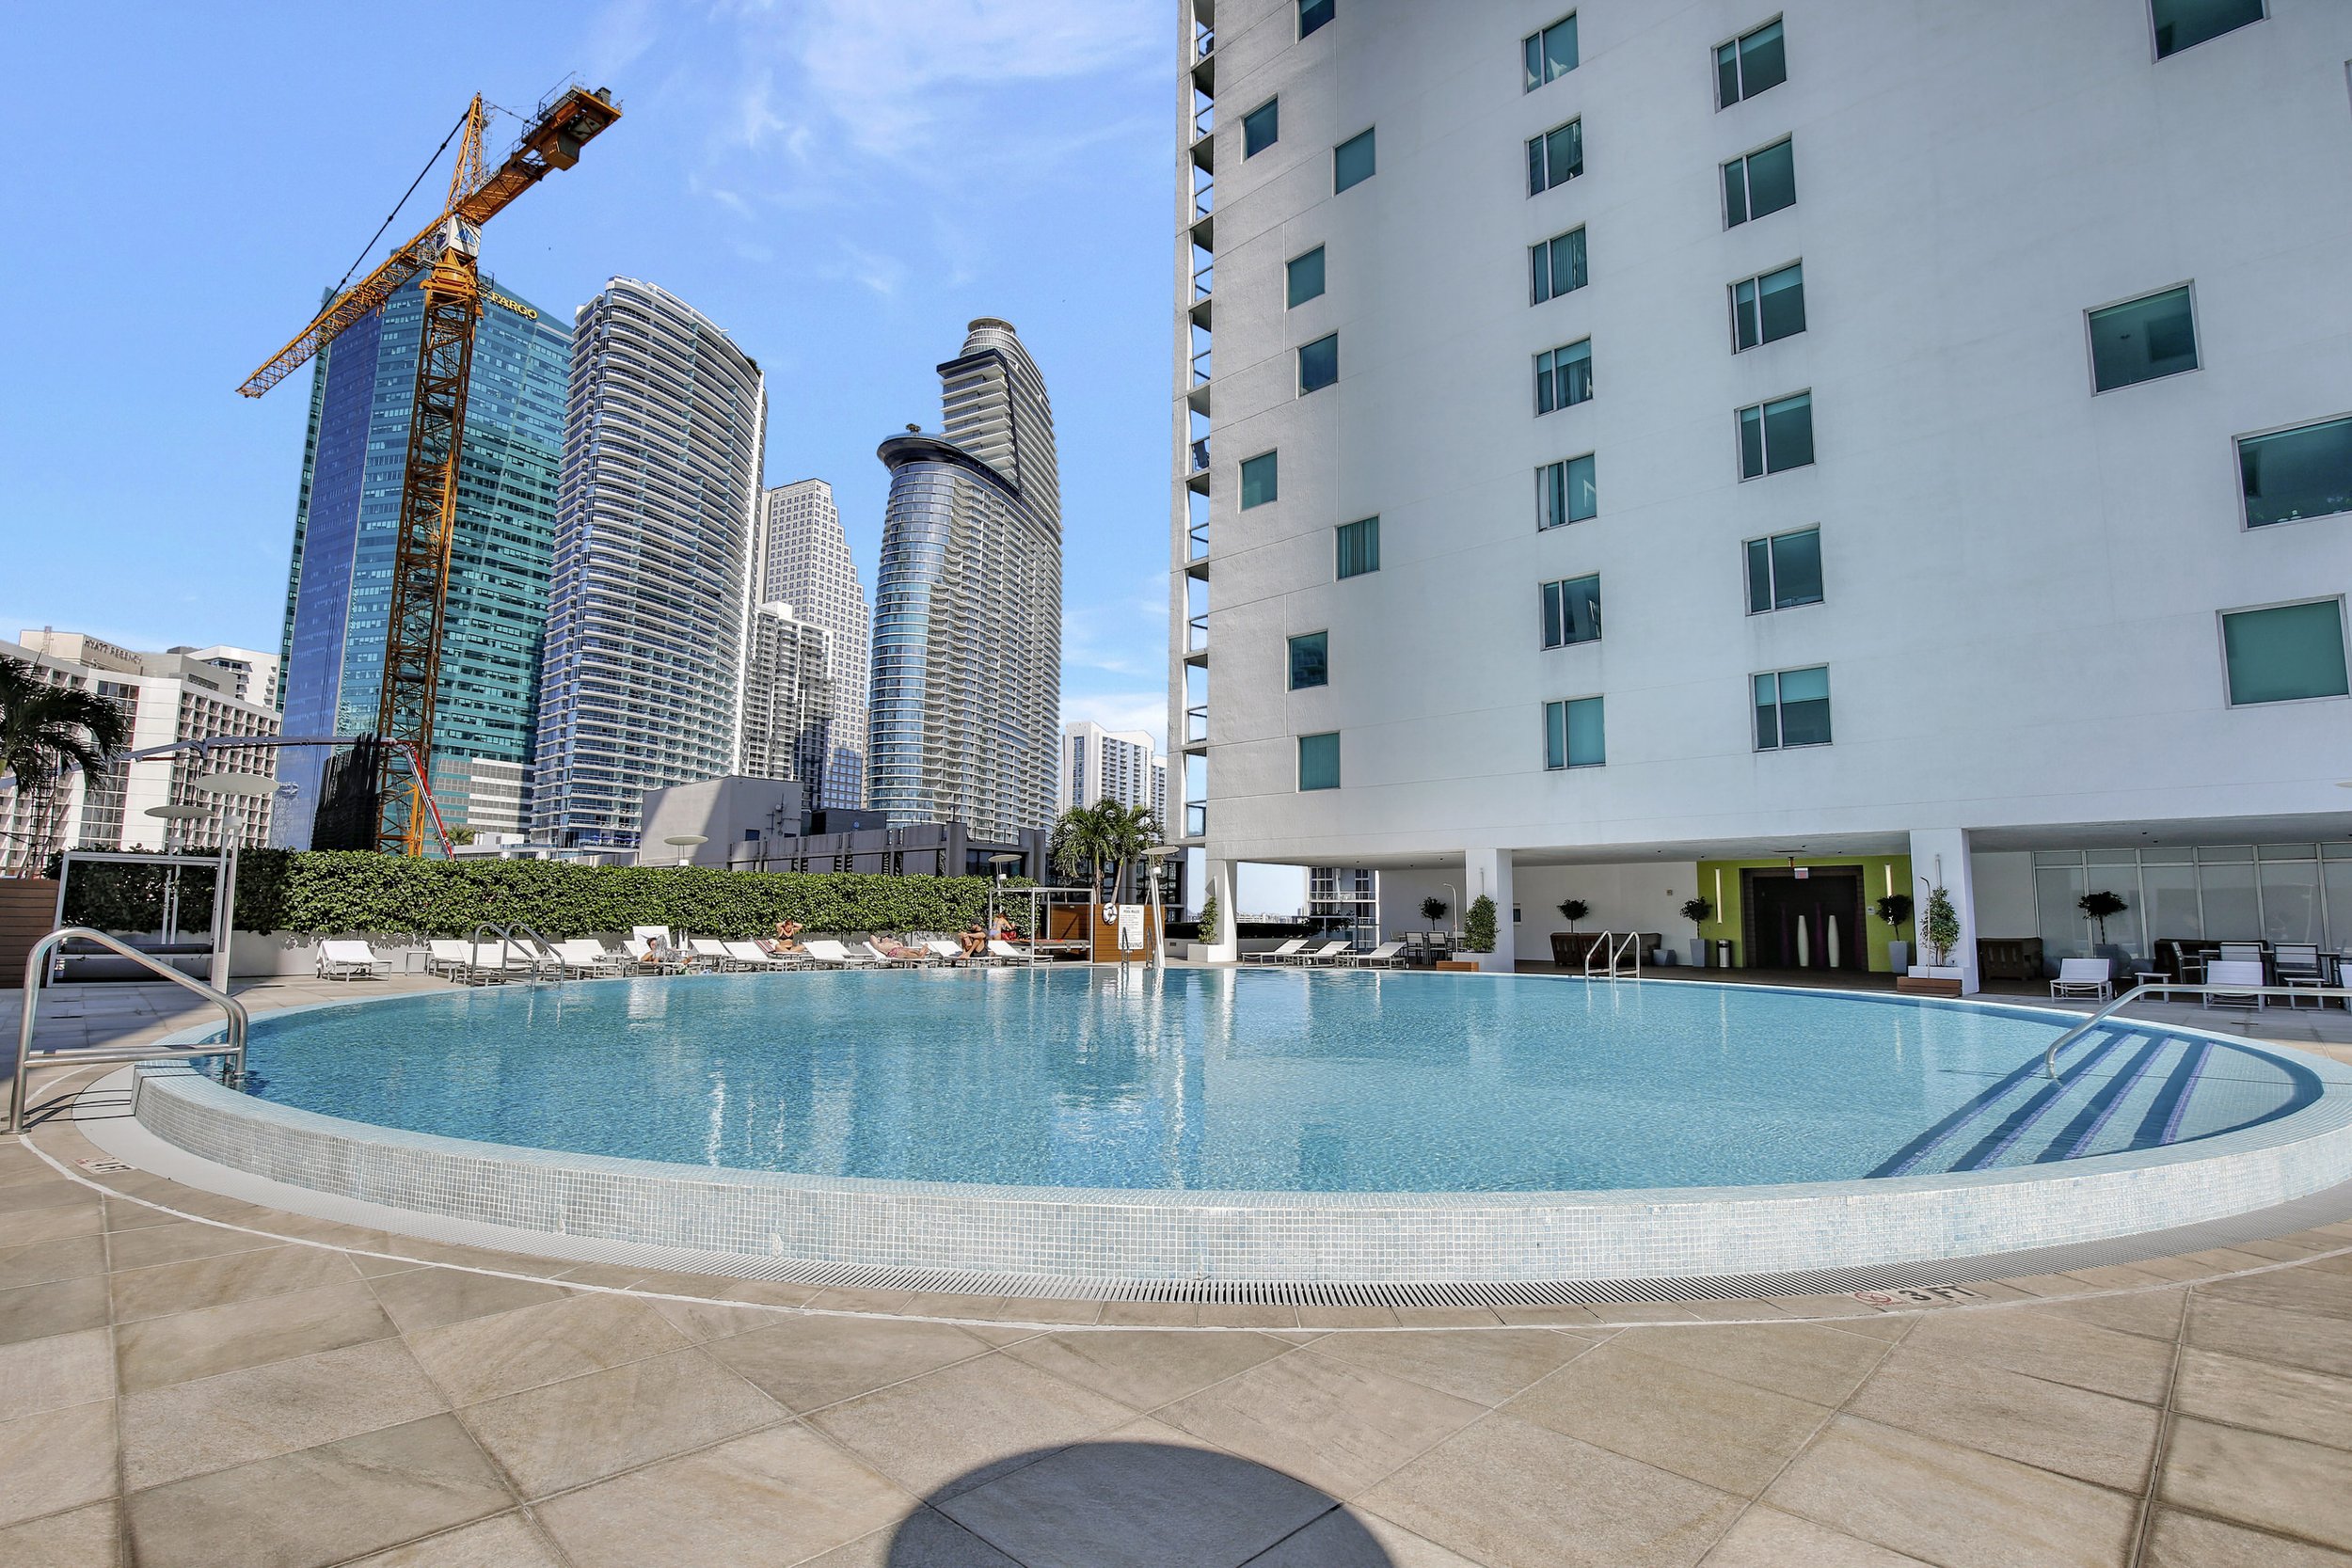 Check Out This Two-Bedroom Condo For Under $900K In Brickell 35.jpg